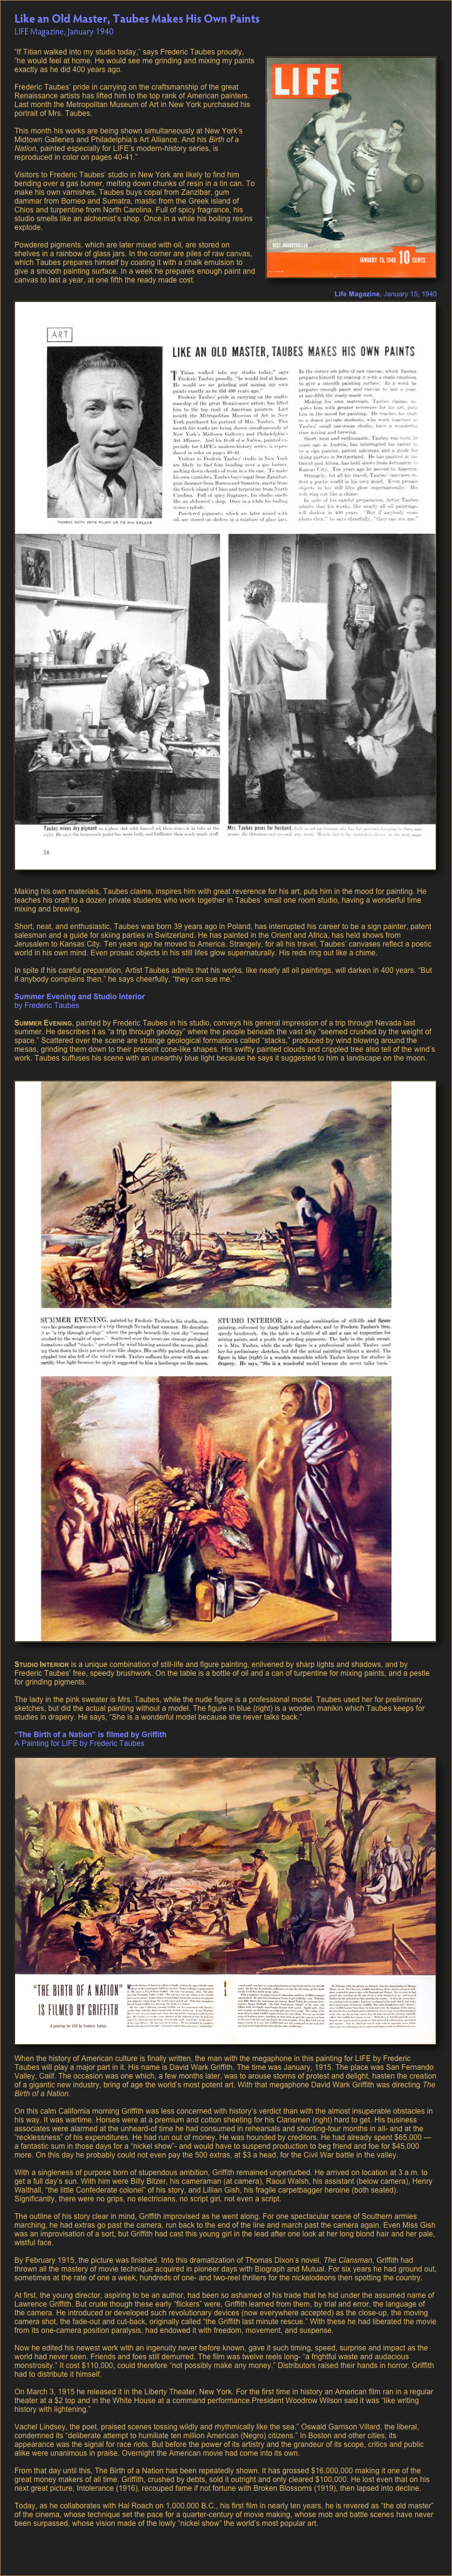 Like an Old Master, Taubes Makes His Own Paints
LIFE Magazine, January 1940

￼“If Titian walked into my studio today,” says Frederic Taubes proudly, “he would feel at home. He would see me grinding and mixing my paints exactly as he did 400 years ago.

Frederic Taubes’ pride in carrying on the craftsmanship of the great Renaissance artists has lifted him to the top rank of American painters.
Last month the Metropolitan Museum of Art in New York purchased his portrait of Mrs. Taubes.

This month his works are being shown simultaneously at New York’s Midtown Galleries and Philadelphia’s Art Alliance. And his Birth of a Nation, painted especially for LIFE’s modern-history series, is reproduced in color on pages 40-41.”

Visitors to Frederic Taubes’ studio in New York are likely to find him bending over a gas burner, melting down chunks of resin in a tin can. To make his own varnishes, Taubes buys copal from Zanzibar, gum dammar from Borneo and Sumatra, mastic from the Greek island of Chios and turpentine from North Carolina. Full of spicy fragrance, his studio smells like an alchemist’s shop. Once in a while his boiling resins explode.￼

Powdered pigments, which are later mixed with oil, are stored on shelves in a rainbow of glass jars. In the corner are piles of raw canvas, which Taubes prepares himself by coating it with a chalk emulsion to give a smooth painting surface. In a week he prepares enough paint and canvas to last a year, at one fifth the ready made cost.

￼
Making his own materials, Taubes claims, inspires him with great reverence for his art, puts him in the mood for painting. He teaches his craft to a dozen private students who work together in Taubes’ small one room studio, having a wonderful time mixing and brewing.

Short, neat, and enthusiastic, Taubes was born 39 years ago in Poland, has interrupted his career to be a sign painter, patent salesman and a guide for skiing parties in Switzerland. He has painted in the Orient and Africa, has held shows from Jerusalem to Kansas City. Ten years ago he moved to America. Strangely, for all his travel, Taubes’ canvases reflect a poetic world in his own mind. Even prosaic objects in his still lifes glow supernaturally. His reds ring out like a chime.

In spite if his careful preparation, Artist Taubes admits that his works, like nearly all oil paintings, will darken in 400 years. “But if anybody complains then,” he says cheerfully, “they can sue me.”

Summer Evening and Studio Interior
by Frederic Taubes

Summer Evening, painted by Frederic Taubes in his studio, conveys his general impression of a trip through Nevada last summer. He describes it as “a trip through geology” where the people beneath the vast sky “seemed crushed by the weight of space.” Scattered over the scene are strange geological formations called “stacks,” produced by wind blowing around the mesas, grinding them down to their present cone-like shapes. His swiftly painted clouds and crippled tree also tell of the wind’s work. Taubes suffuses his scene with an unearthly blue light because he says it suggested to him a landscape on the moon.

￼
Studio Interior is a unique combination of still-life and figure painting, enlivened by sharp lights and shadows, and by Frederic Taubes’ free, speedy brushwork. On the table is a bottle of oil and a can of turpentine for mixing paints, and a pestle for grinding pigments.

The lady in the pink sweater is Mrs. Taubes, while the nude figure is a professional model. Taubes used her for preliminary sketches, but did the actual painting without a model. The figure in blue (right) is a wooden manikin which Taubes keeps for studies in drapery. He says, “She is a wonderful model because she never talks back.”
“The Birth of a Nation” is filmed by Griffith
A Painting for LIFE by Frederic Taubes￼When the history of American culture is finally written, the man with the megaphone in this painting for LIFE by Frederic Taubes will play a major part in it. His name is David Wark Griffith. The time was January, 1915. The place was San Fernando Valley, Calif. The occasion was one which, a few months later, was to arouse storms of protest and delight, hasten the creation of a gigantic new industry, bring of age the world’s most potent art. With that megaphone David Wark Griffith was directing The Birth of a Nation.

On this calm California morning Griffith was less concerned with history’s verdict than with the almost insuperable obstacles in his way. It was wartime. Horses were at a premium and cotton sheeting for his Clansmen (right) hard to get. His business associates were alarmed at the unheard-of time he had consumed in rehearsals and shooting-four months in all- and at the “recklessness” of his expenditures. He had run out of money. He was hounded by creditors. He had already spent $65,000 — a fantastic sum in those days for a “nickel show”- and would have to suspend production to beg friend and foe for $45,000 more. On this day he probably could not even pay the 500 extras, at $3 a head, for the Civil War battle in the valley.

With a singleness of purpose born of stupendous ambition, Griffith remained unperturbed. He arrived on location at 3 a.m. to get a full day’s sun. With him were Billy Bitzer, his cameraman (at camera), Raoul Walsh, his assistant (below camera), Henry Walthall, “the little Confederate colonel” of his story, and Lillian Gish, his fragile carpetbagger heroine (both seated). Significantly, there were no grips, no electricians, no script girl, not even a script.

The outline of his story clear in mind, Griffith improvised as he went along. For one spectacular scene of Southern armies marching, he had extras go past the camera, run back to the end of the line and march past the camera again. Even Miss Gish was an improvisation of a sort, but Griffith had cast this young girl in the lead after one look at her long blond hair and her pale, wistful face.
By February 1915, the picture was finished. Into this dramatization of Thomas Dixon’s novel, The Clansman, Griffith had thrown all the mastery of movie technique acquired in pioneer days with Biograph and Mutual. For six years he had ground out, sometimes at the rate of one a week, hundreds of one- and two-reel thrillers for the nickelodeons then spotting the country.

At first, the young director, aspiring to be an author, had been so ashamed of his trade that he hid under the assumed name of Lawrence Griffith. But crude though these early “flickers” were, Griffith learned from them, by trial and error, the language of the camera. He introduced or developed such revolutionary devices (now everywhere accepted) as the close-up, the moving camera shot, the fade-out and cut-back, originally called “the Griffith last minute rescue.” With these he had liberated the movie from its one-camera position paralysis, had endowed it with freedom, movement, and suspense.

Now he edited his newest work with an ingenuity never before known, gave it such timing, speed, surprise and impact as the world had never seen. Friends and foes still demurred. The film was twelve reels long- “a frightful waste and audacious monstrosity.” It cost $110,000, could therefore “not possibly make any money.” Distributors raised their hands in horror. Griffith had to distribute it himself.

On March 3, 1915 he released it in the Liberty Theater, New York. For the first time in history an American film ran in a regular theater at a $2 top and in the White House at a command performance.President Woodrow Wilson said it was “like writing history with lightening.”

Vachel Lindsey, the poet, praised scenes tossing wildly and rhythmically like the sea.” Oswald Garrison Villard, the liberal, condemned its “deliberate attempt to humiliate ten million American (Negro) citizens.” In Boston and other cities, its appearance was the signal for race riots. But before the power of its artistry and the grandeur of its scope, critics and public alike were unanimous in praise. Overnight the American movie had come into its own.

From that day until this, The Birth of a Nation has been repeatedly shown. It has grossed $16,000,000 making it one of the great money makers of all time. Griffith, crushed by debts, sold it outright and only cleared $100,000. He lost even that on his next great picture, Intolerance (1916), recouped fame if not fortune with Broken Blossoms (1919), then lapsed into decline.

Today, as he collaborates with Hal Roach on 1,000,000 B.C., his first film in nearly ten years, he is revered as “the old master” of the cinema, whose technique set the pace for a quarter-century of movie making, whose mob and battle scenes have never been surpassed, whose vision made of the lowly “nickel show” the world’s most popular art.